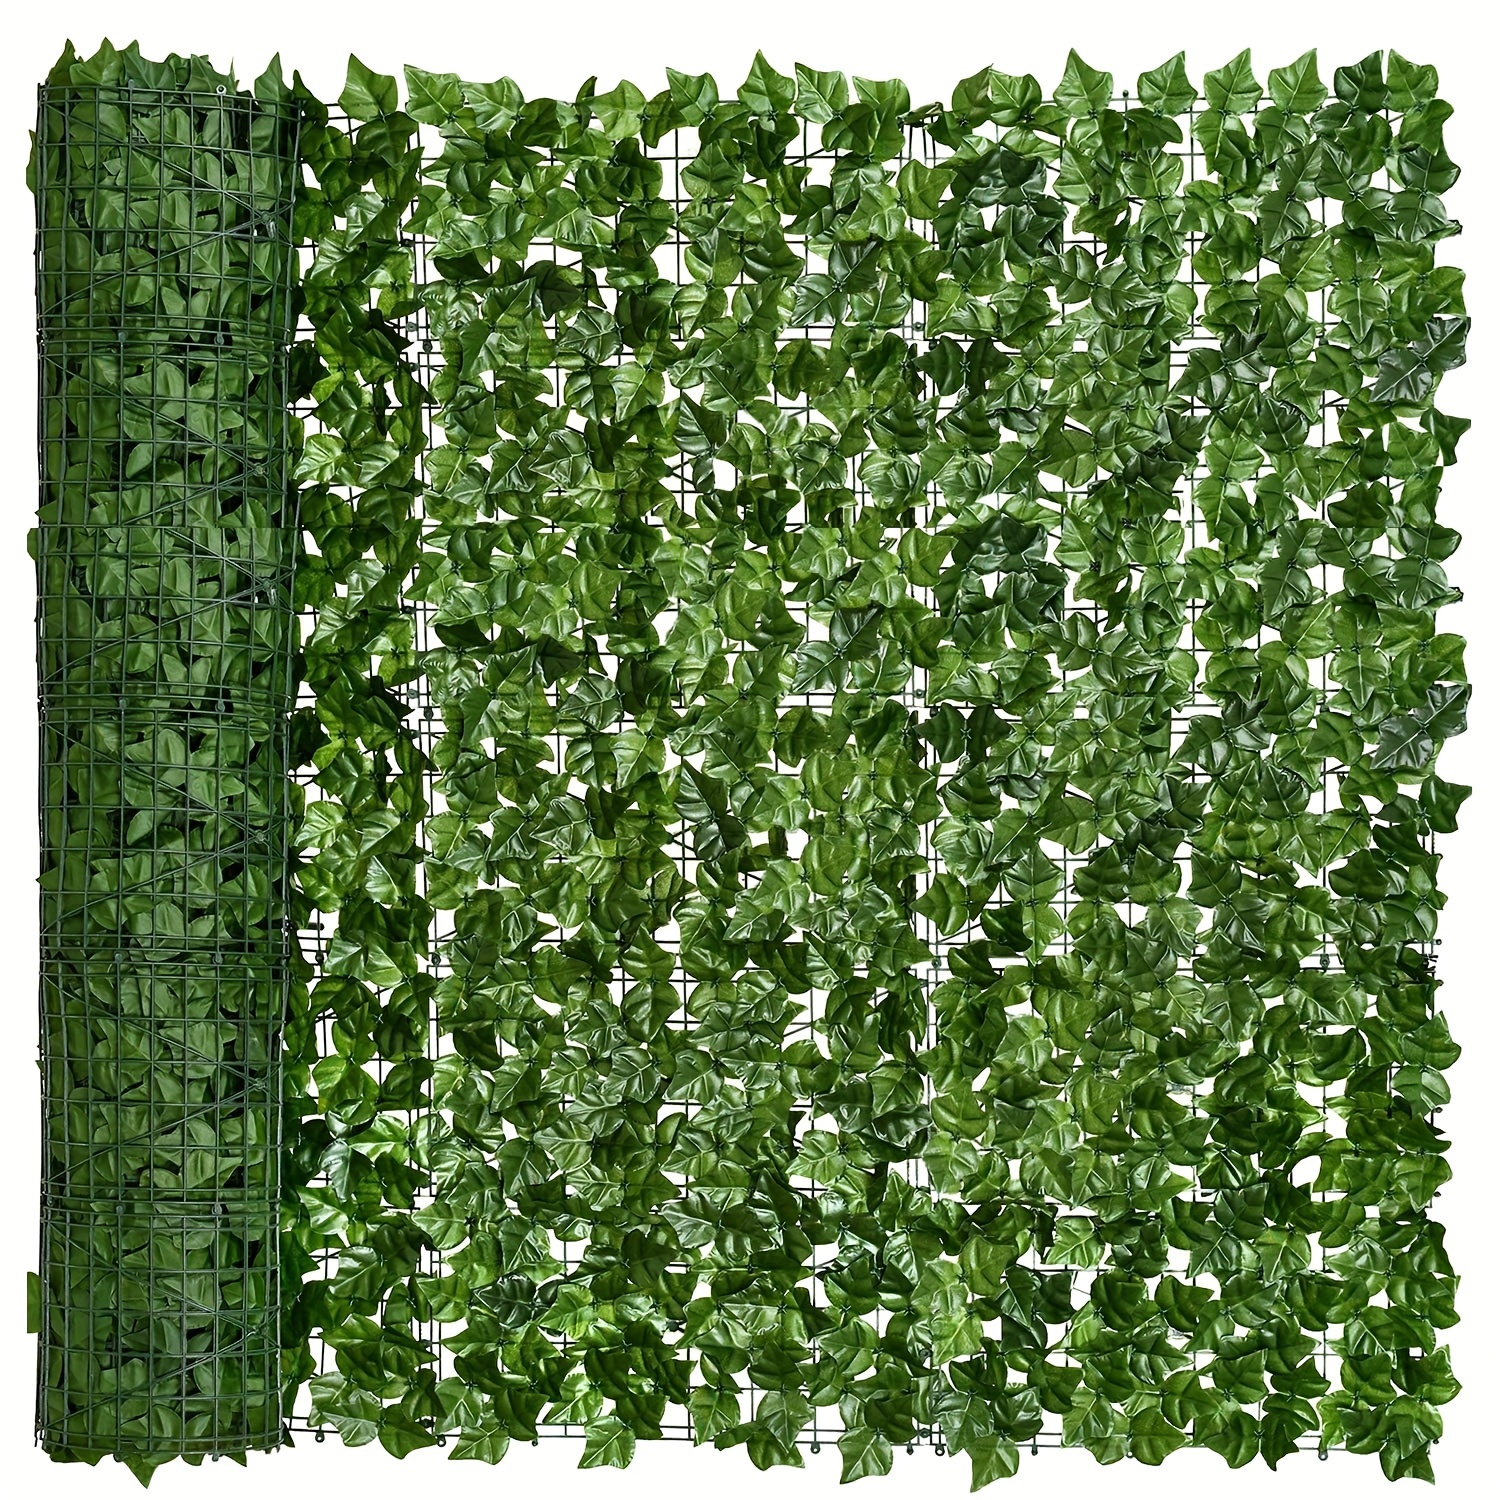 

1pc Artificial Ivy Privacy Fence Screen, Faux Ivy Leaf Hedge Panel, Outdoor/indoor Garden Wall Decor, Plastic Greenery Fence Decoration For Patio, Balcony, Home Decor, 19.7x118 Inches